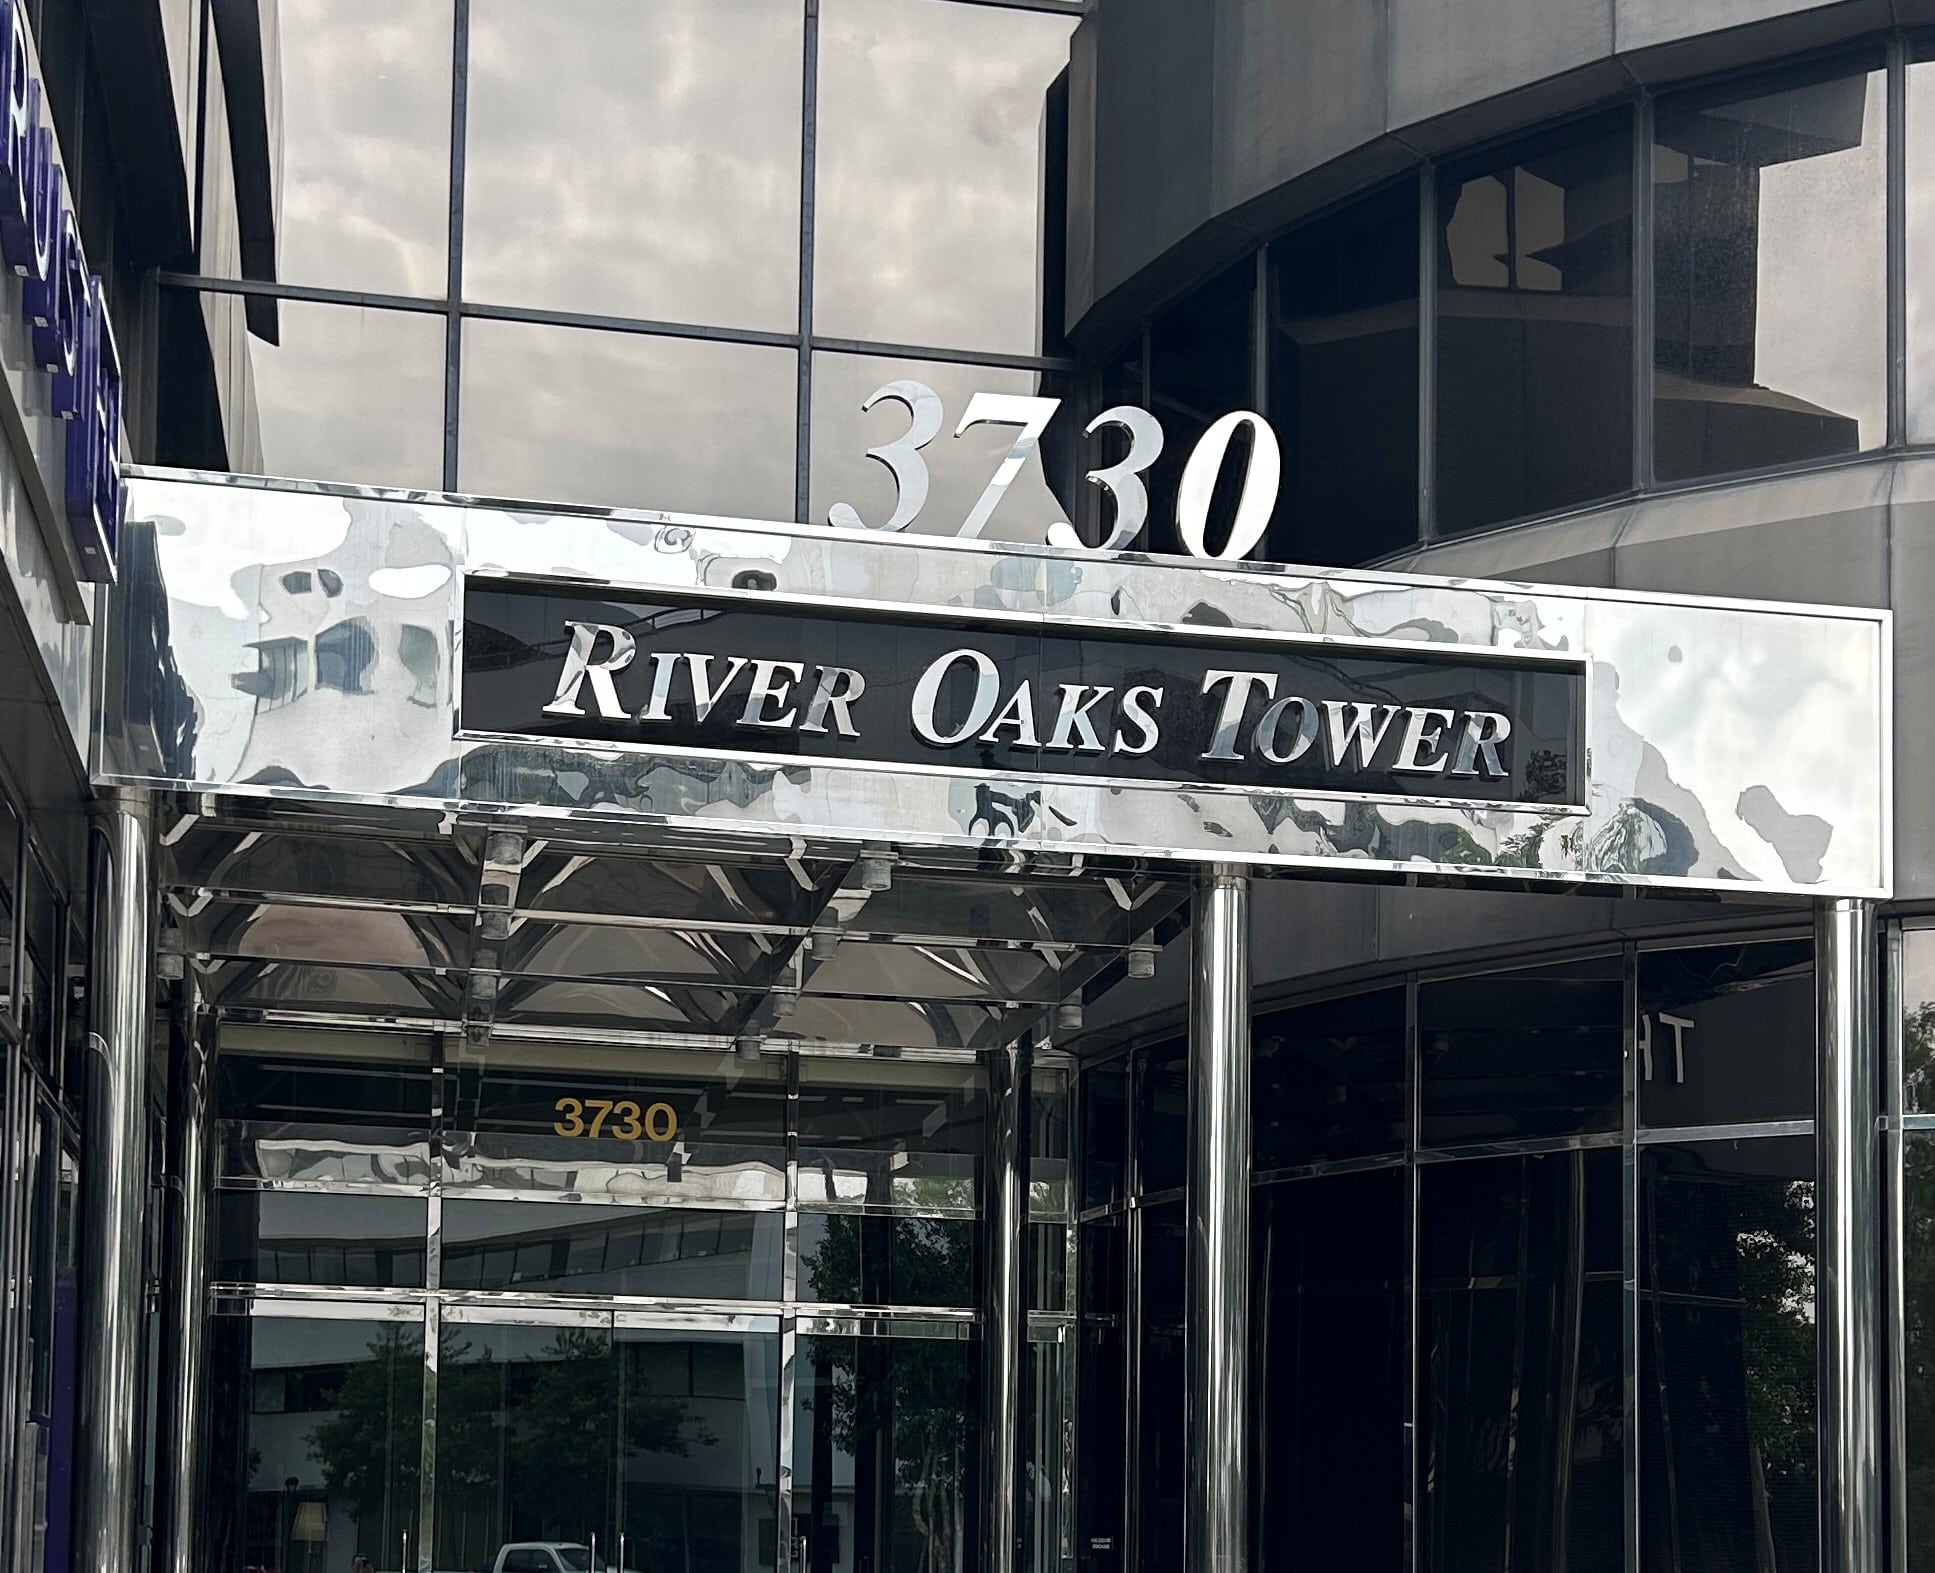 We Have Moved to the River Oaks Tower